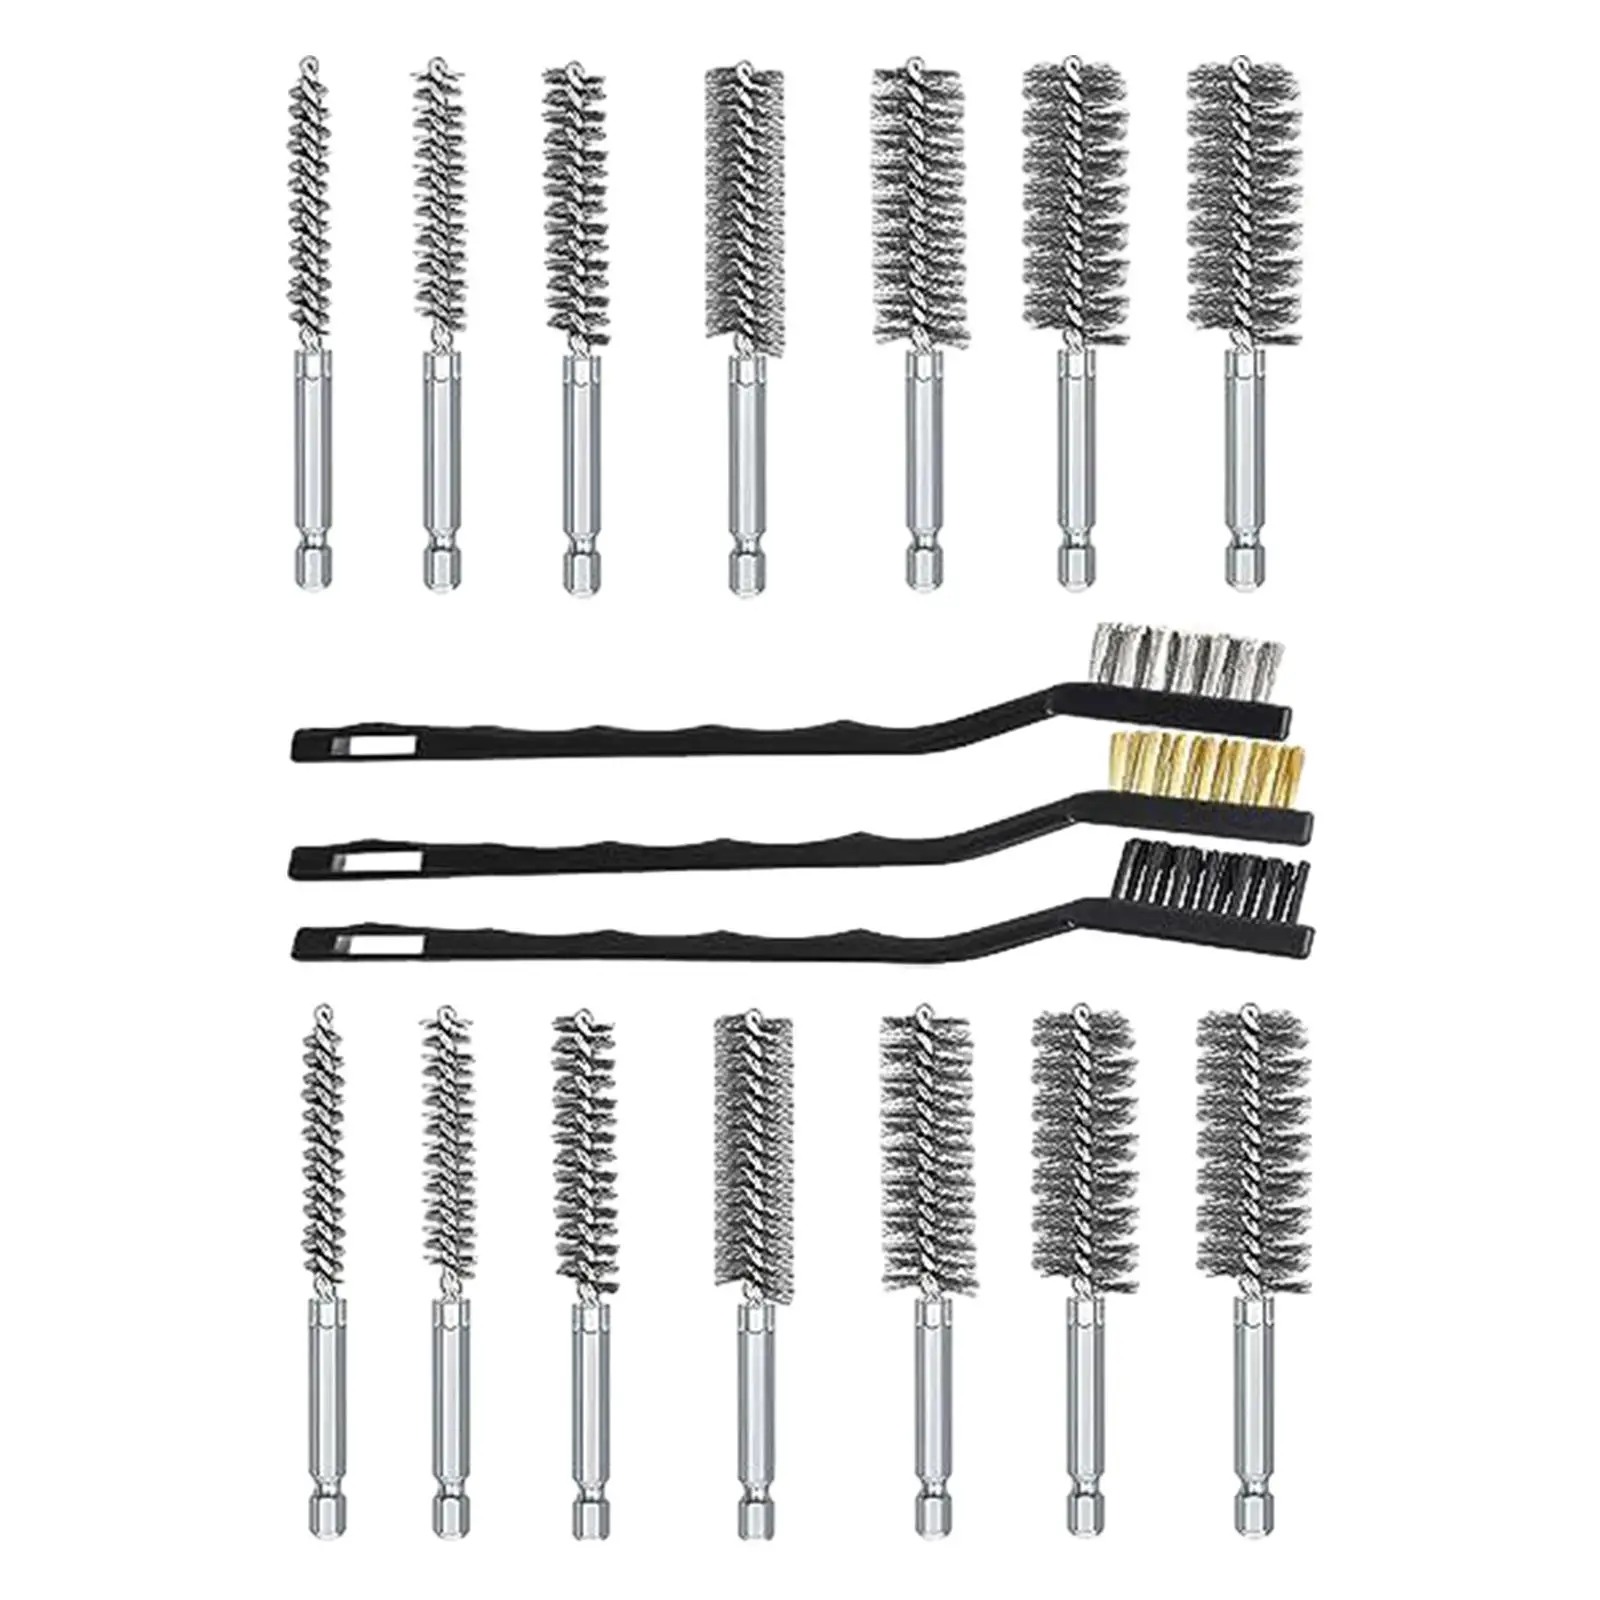 Bore Brush Set Accessories Different Sizes Sturdy with Handle Durable Metal 1/4 inch Hex Shank for Power Drill Impact Driver